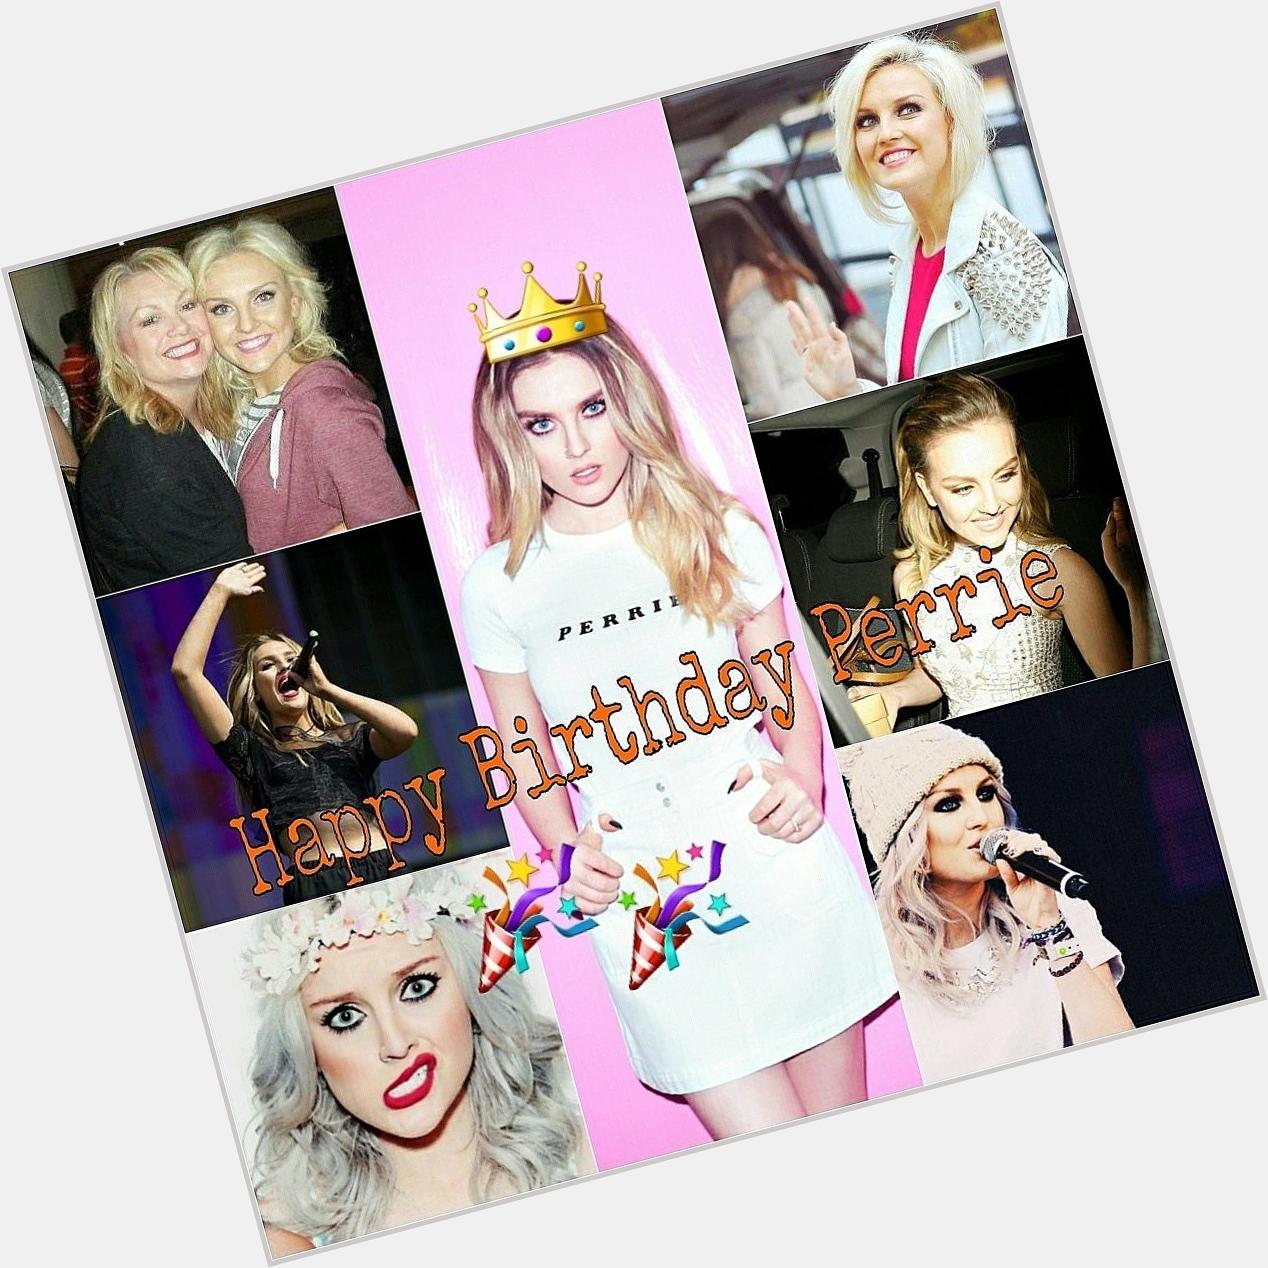 Happy 22th Birthday to Perrie Edwards!!!     